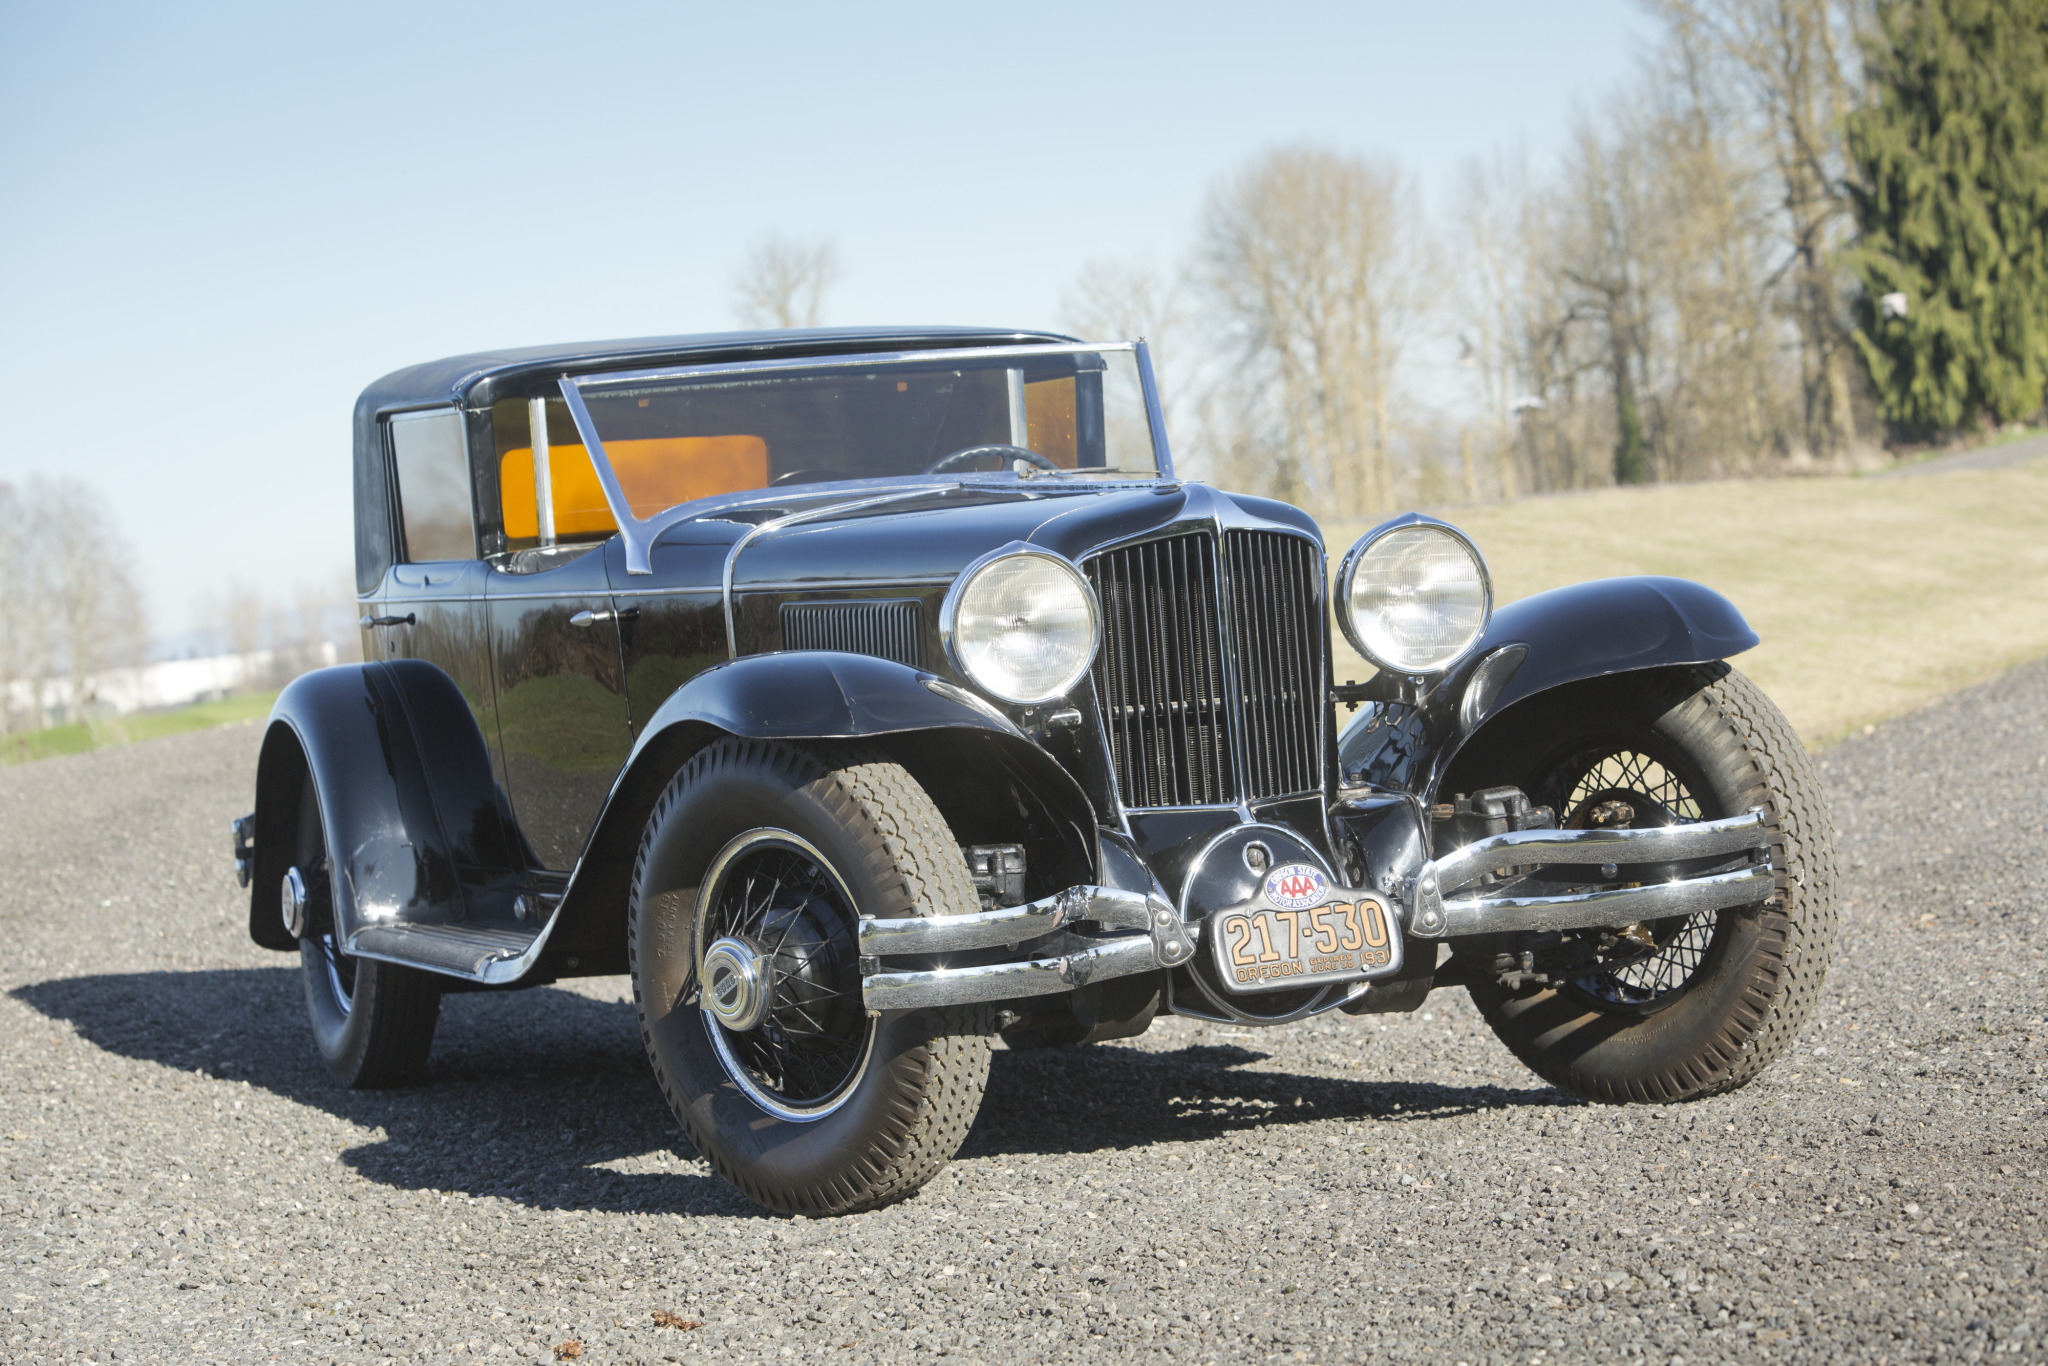 RECENTLY DISCOVERED ORIGINAL, CUSTOM BODIED “HOLLYWOOD” CORD TO SHINE AT BONHAMS AMELIA ISLAND AUCTION cover